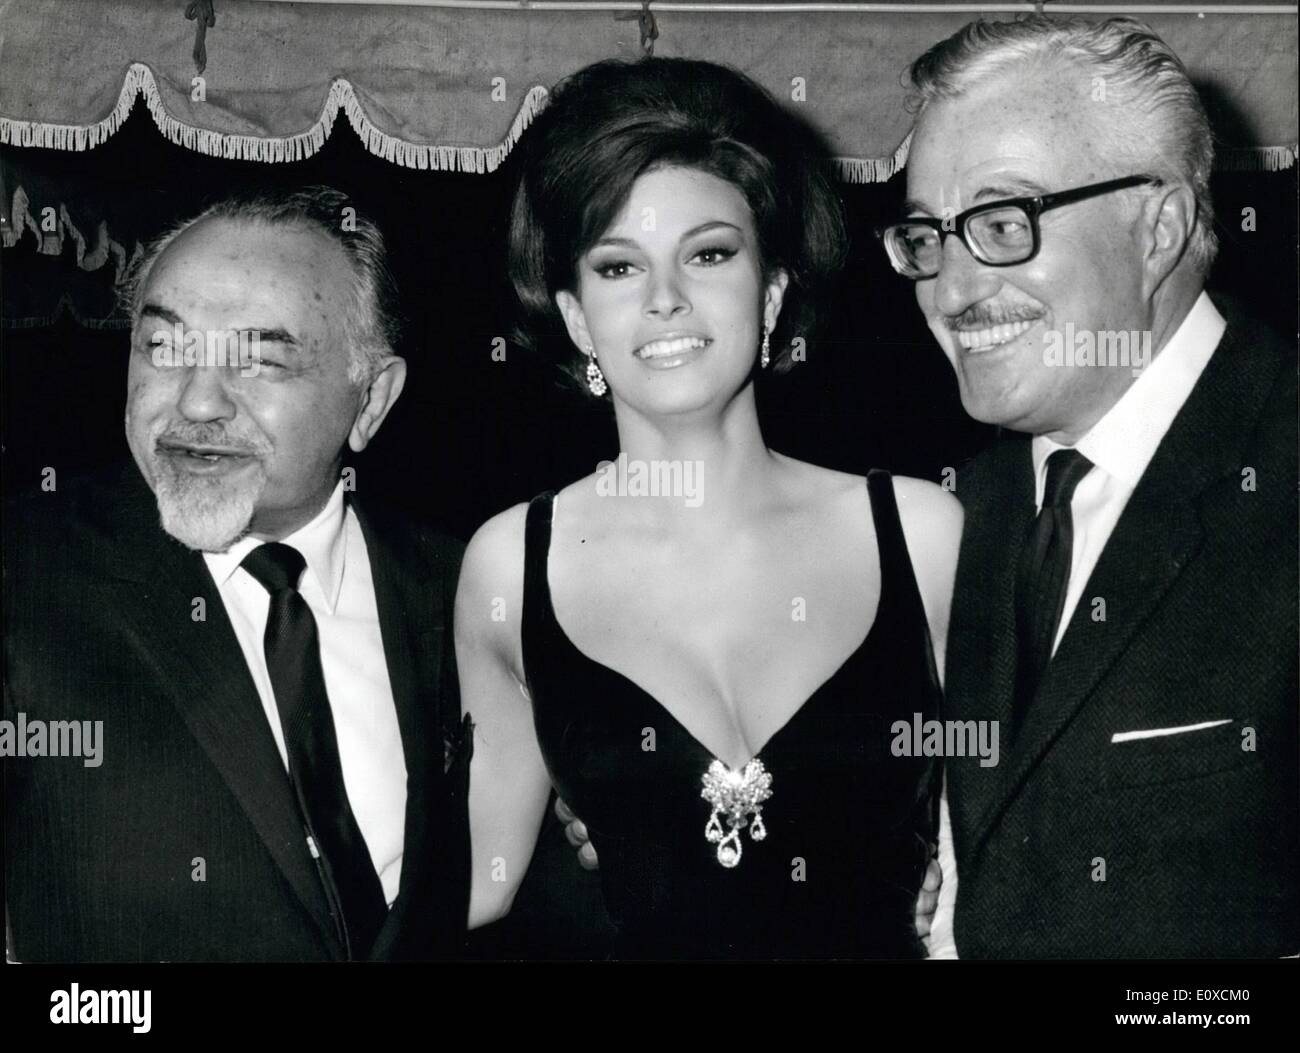 Apr. 04, 1966 - The stars of the film 'The biggest bundle of them all'' were presented to the press. They are Vittorio De Sica (an old gangster..) Edward G. Robinson (the professor of the gang..) and the last superstar Raquel Welch (thee woman of the gang..). Photo shows Edward G. Robinson, Raquel Welch and Vittorio De Sica. Stock Photo